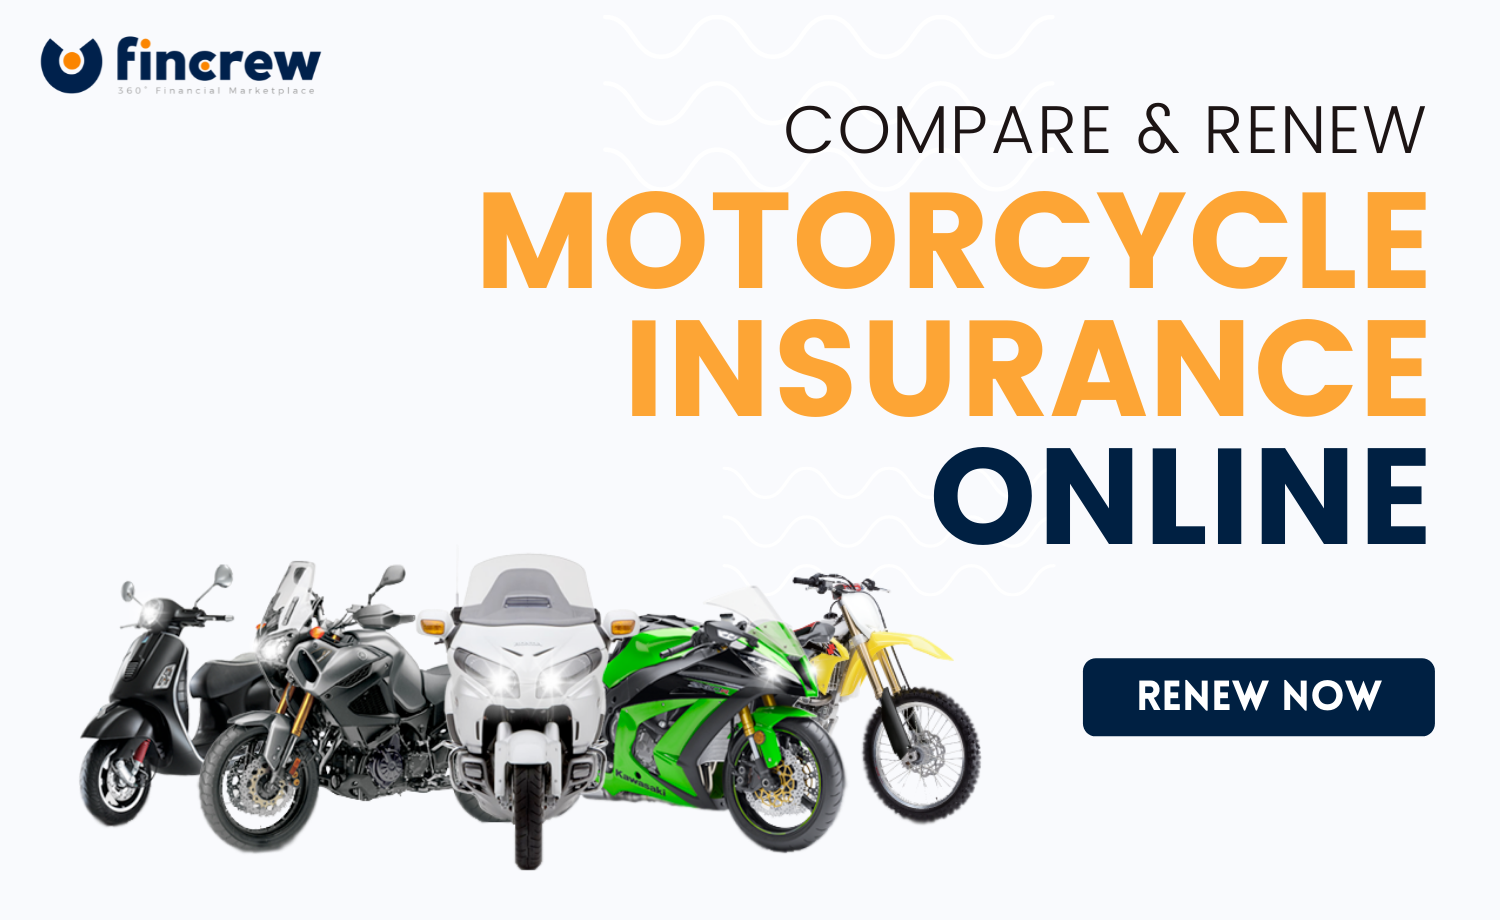 Compare & Renew Your Motorcycle Insurance Online blog featured image